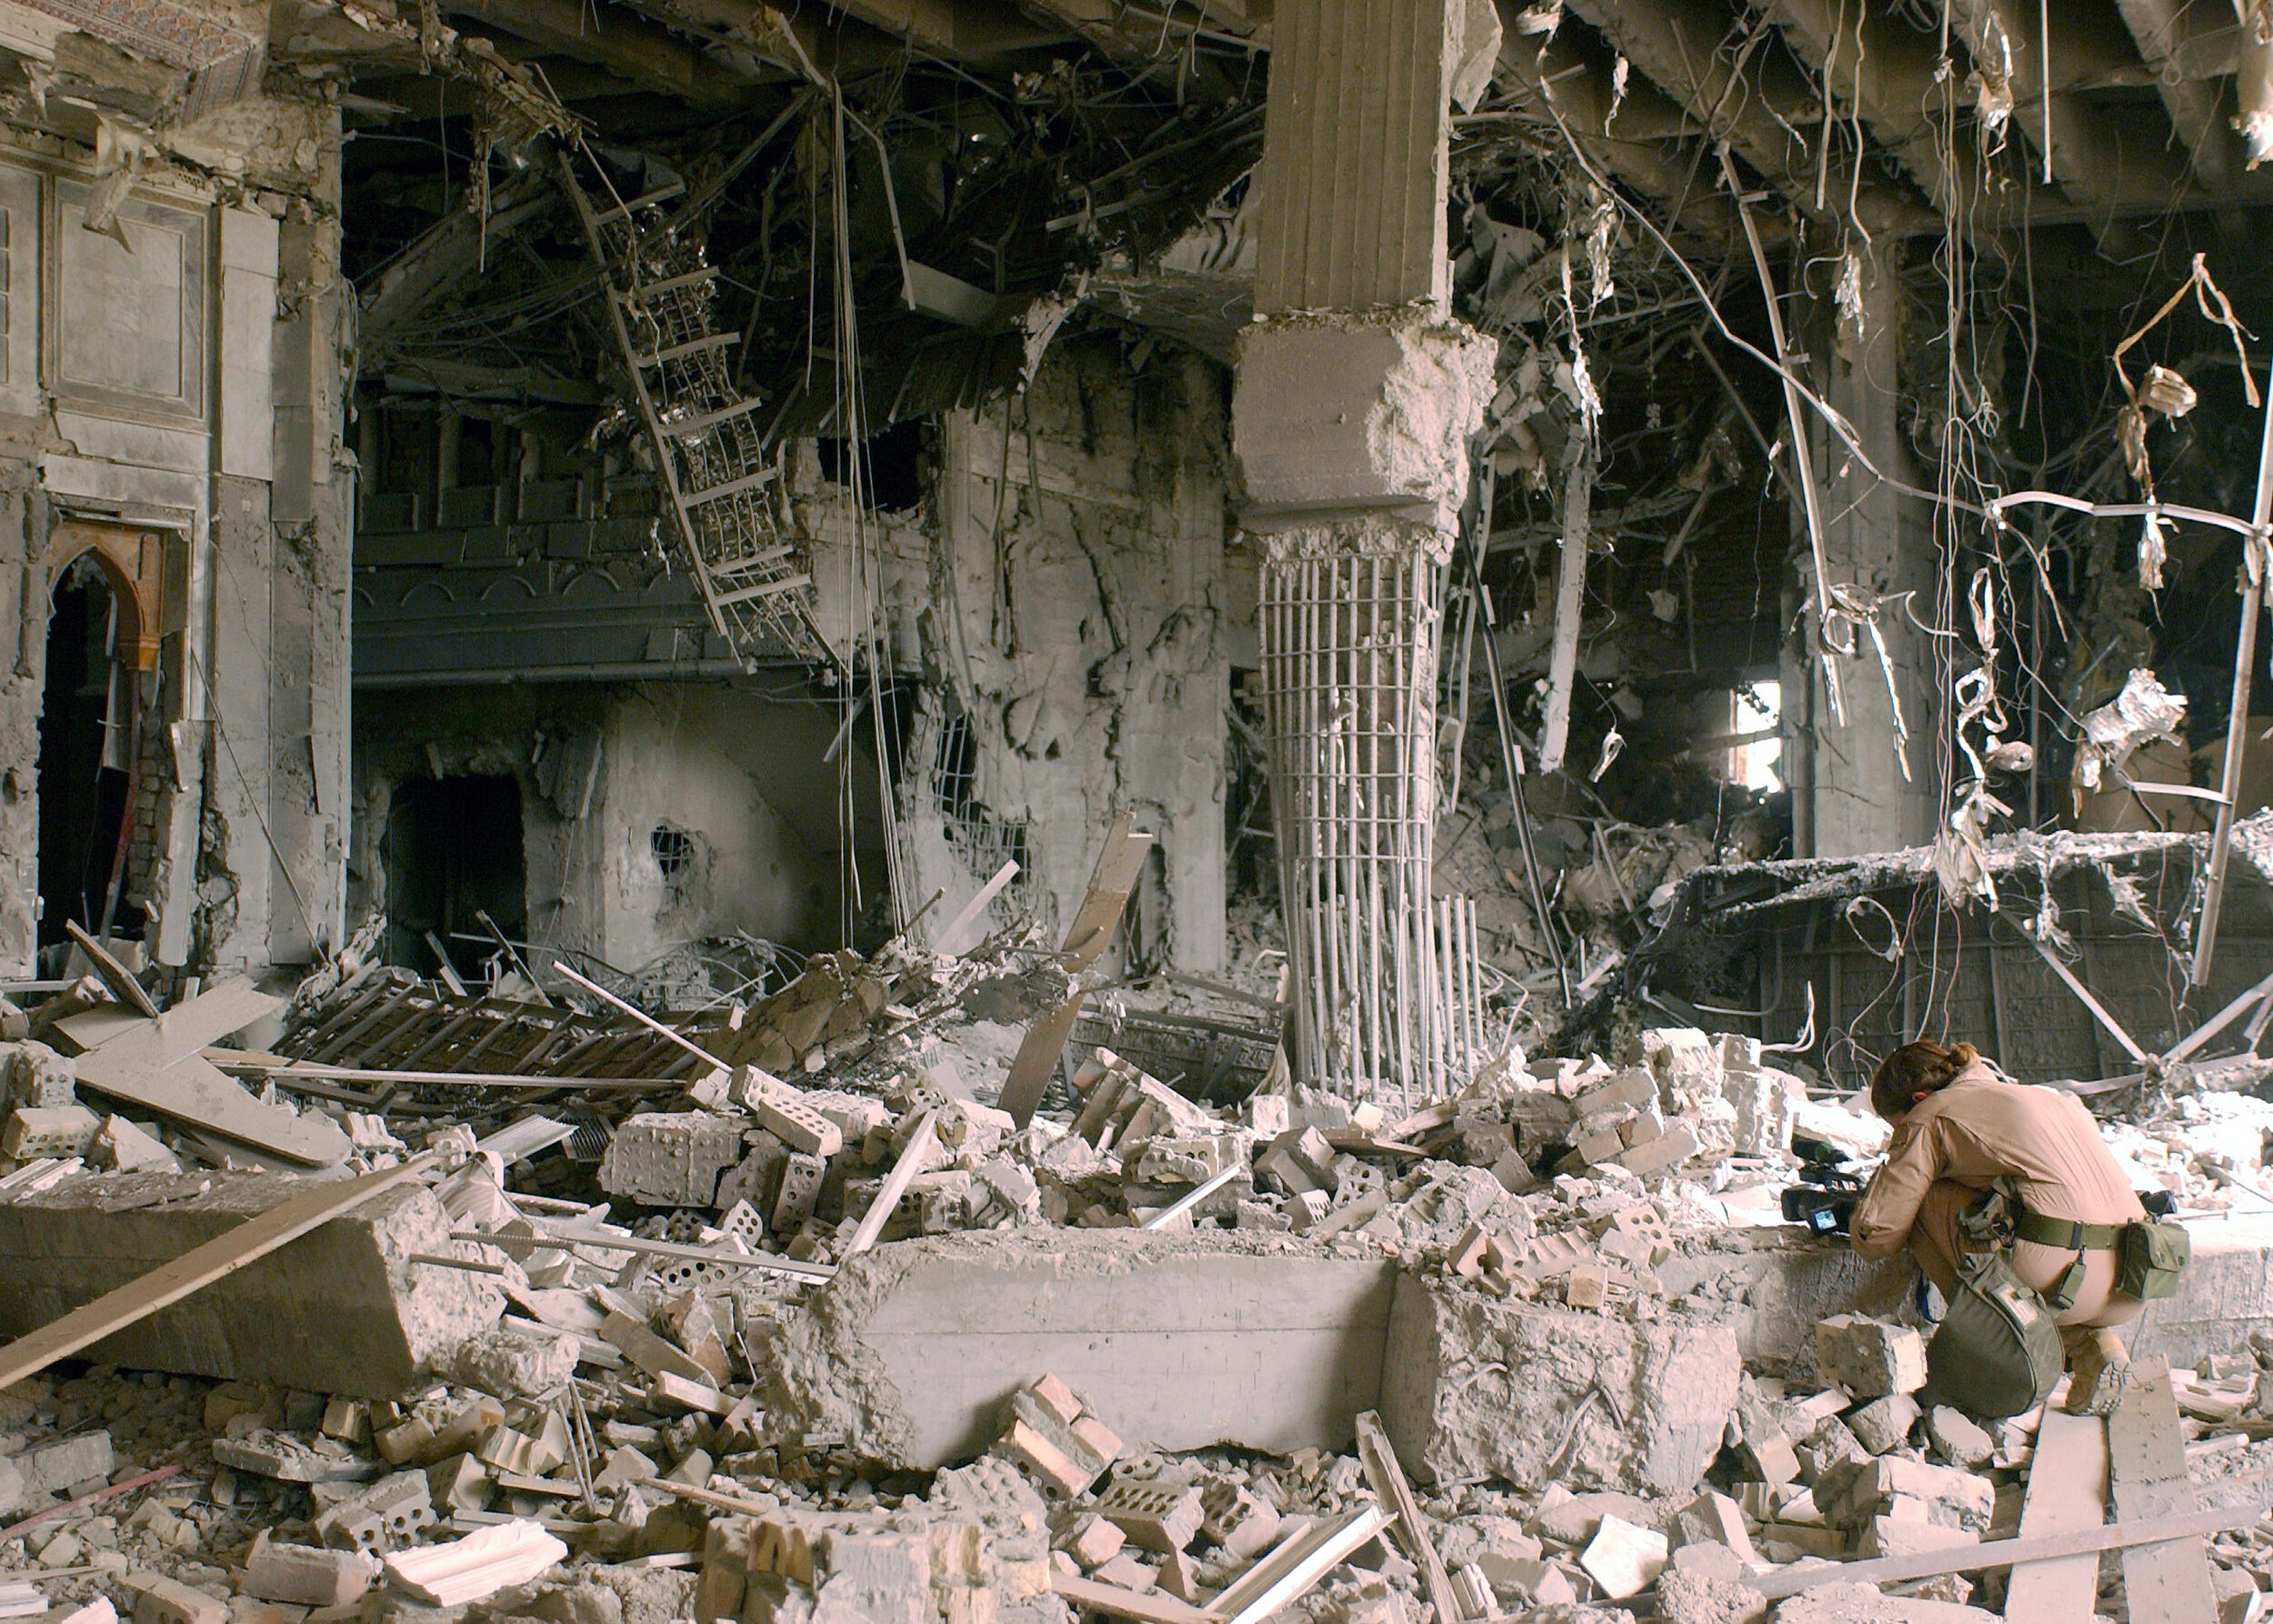 April 25th, 2003. PICTURED: A photographer captures an image of the remains of the Baath Army headquarters in Baghdad. Photo credit SSGT Cherie Thurlby. CC. 2.0